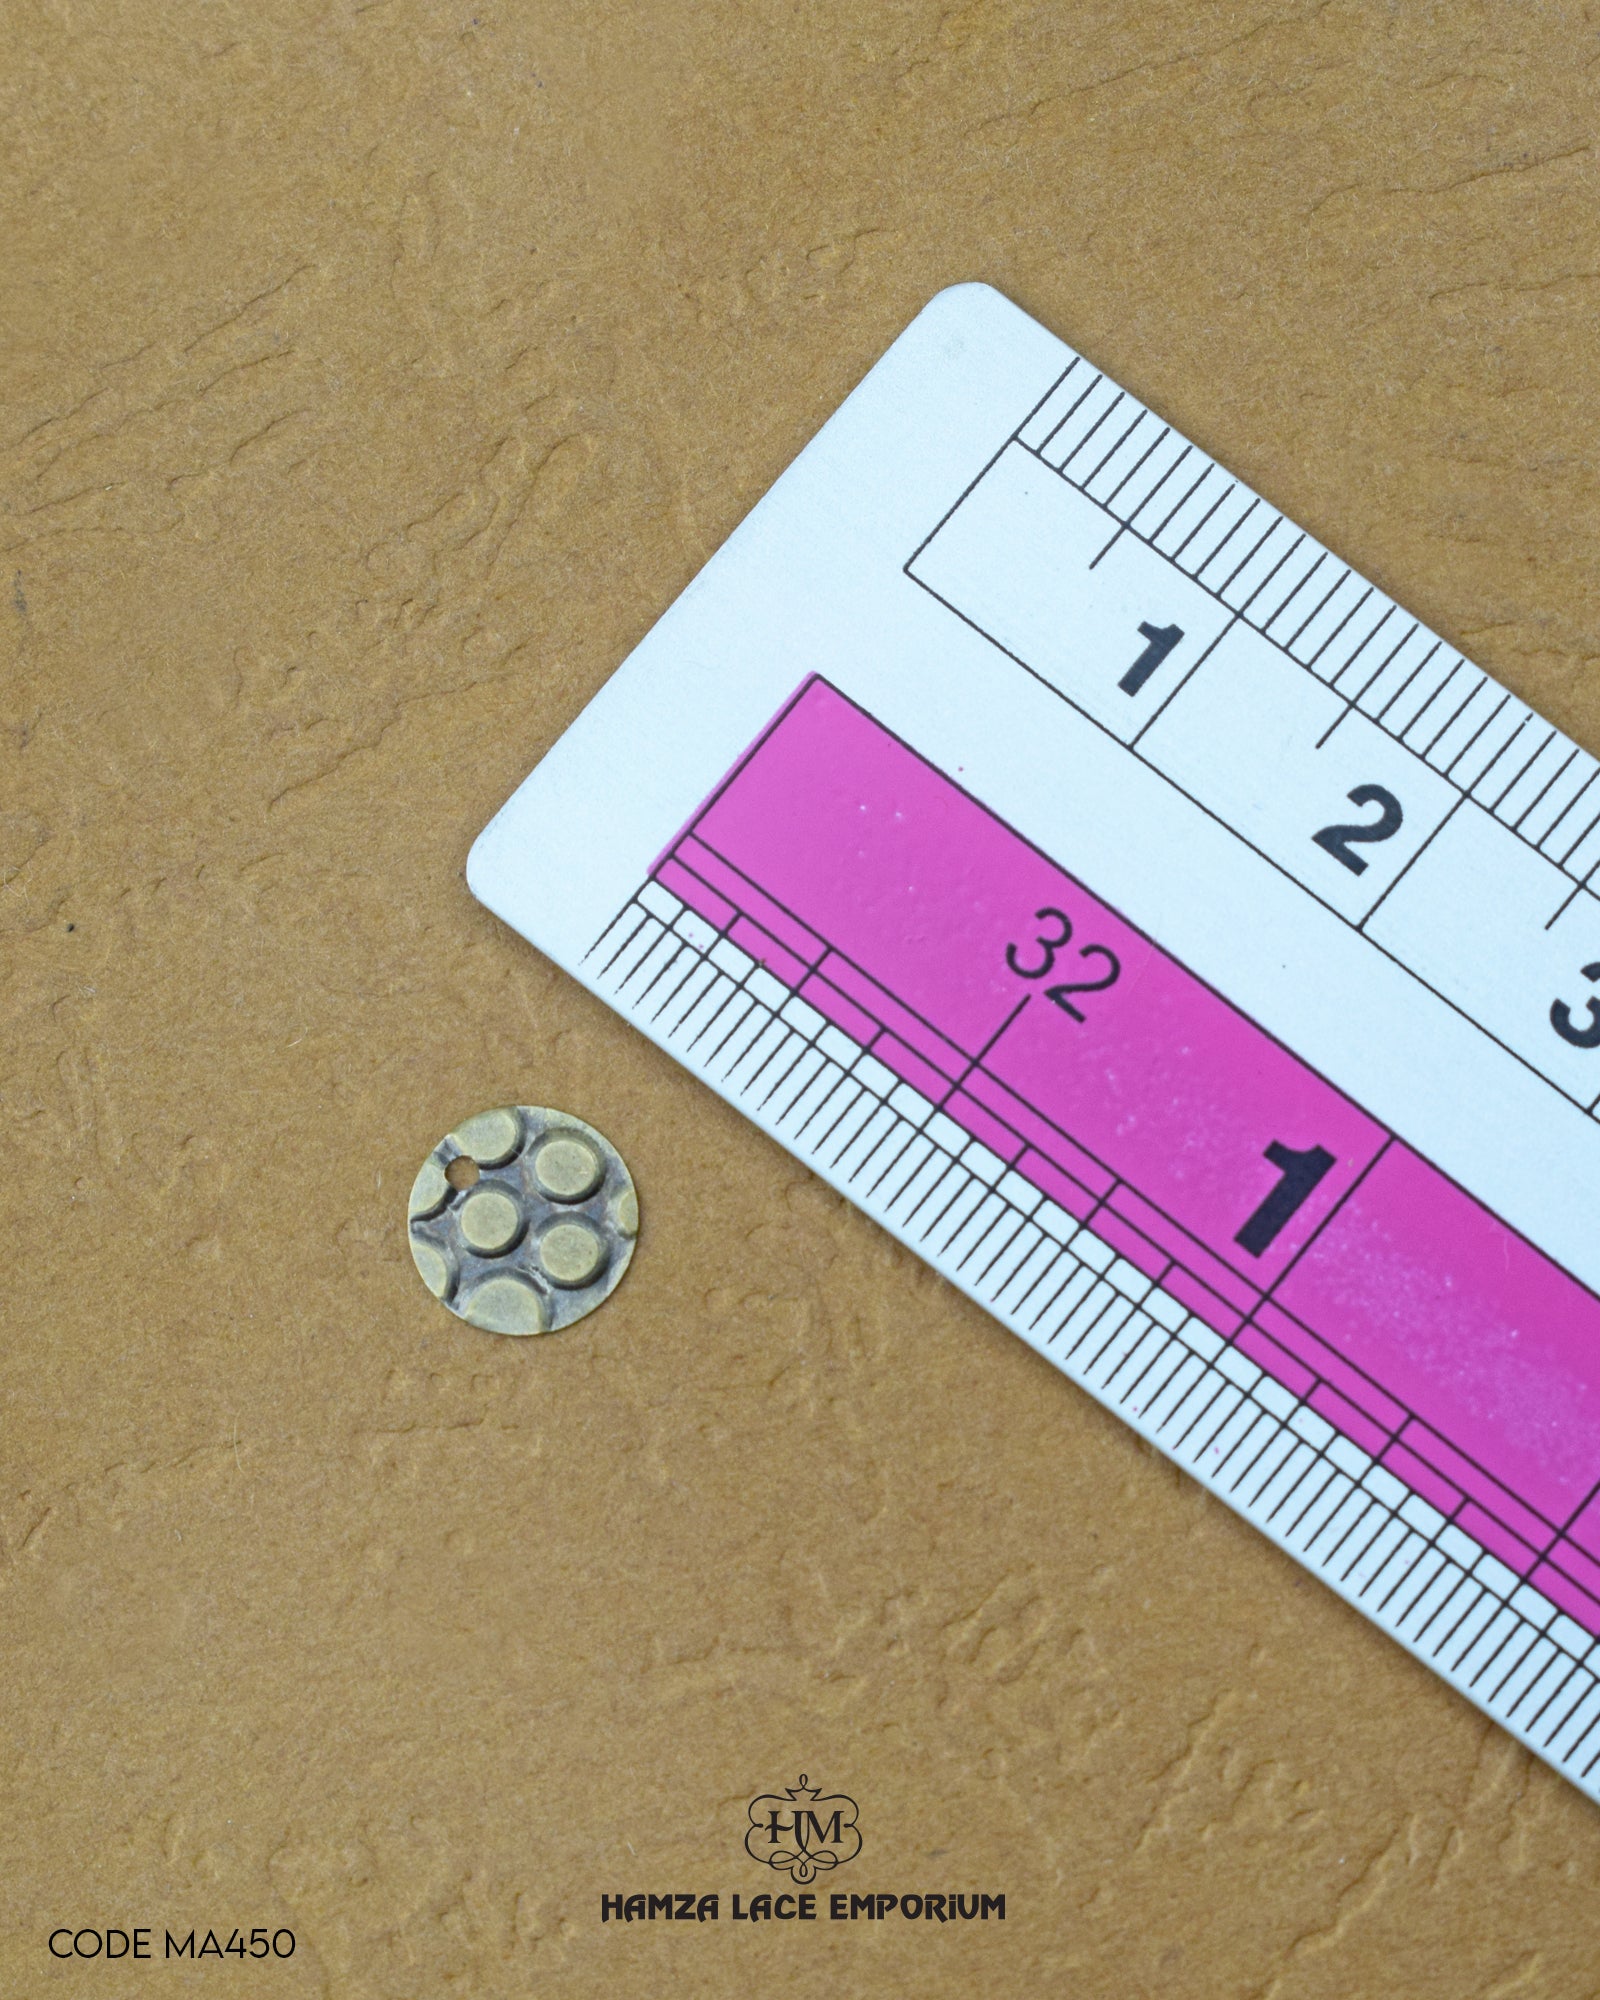 The size of the Beautifully designed 'Hanging Accessory MA450' is measured by using a ruler